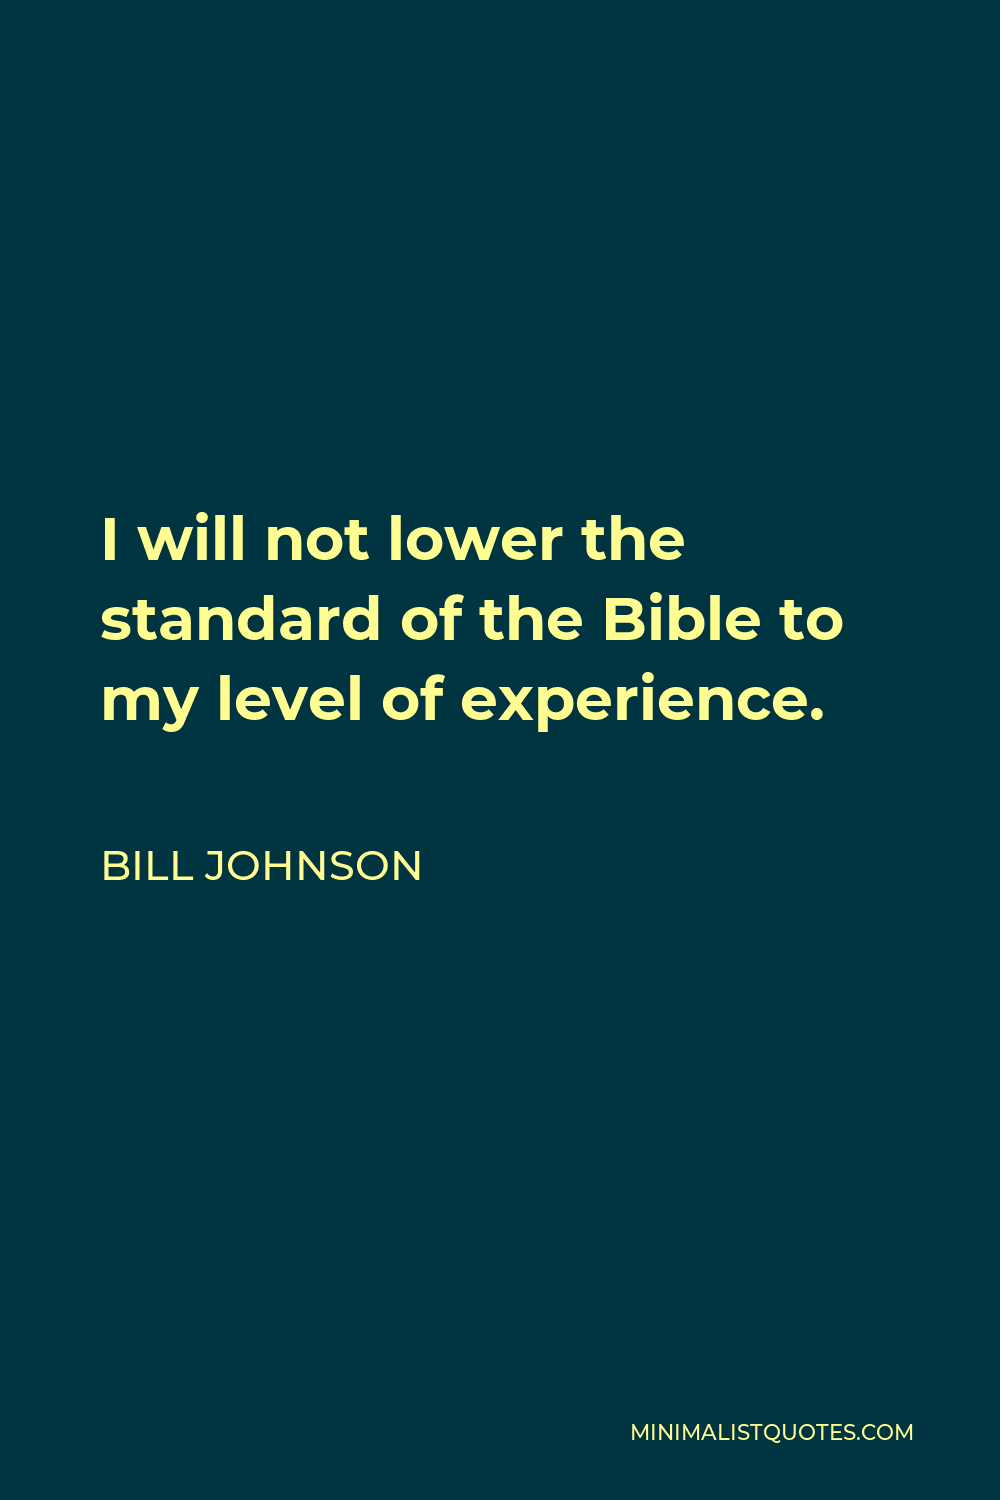 Bill Johnson Quote - I will not lower the standard of the Bible to my level of experience.